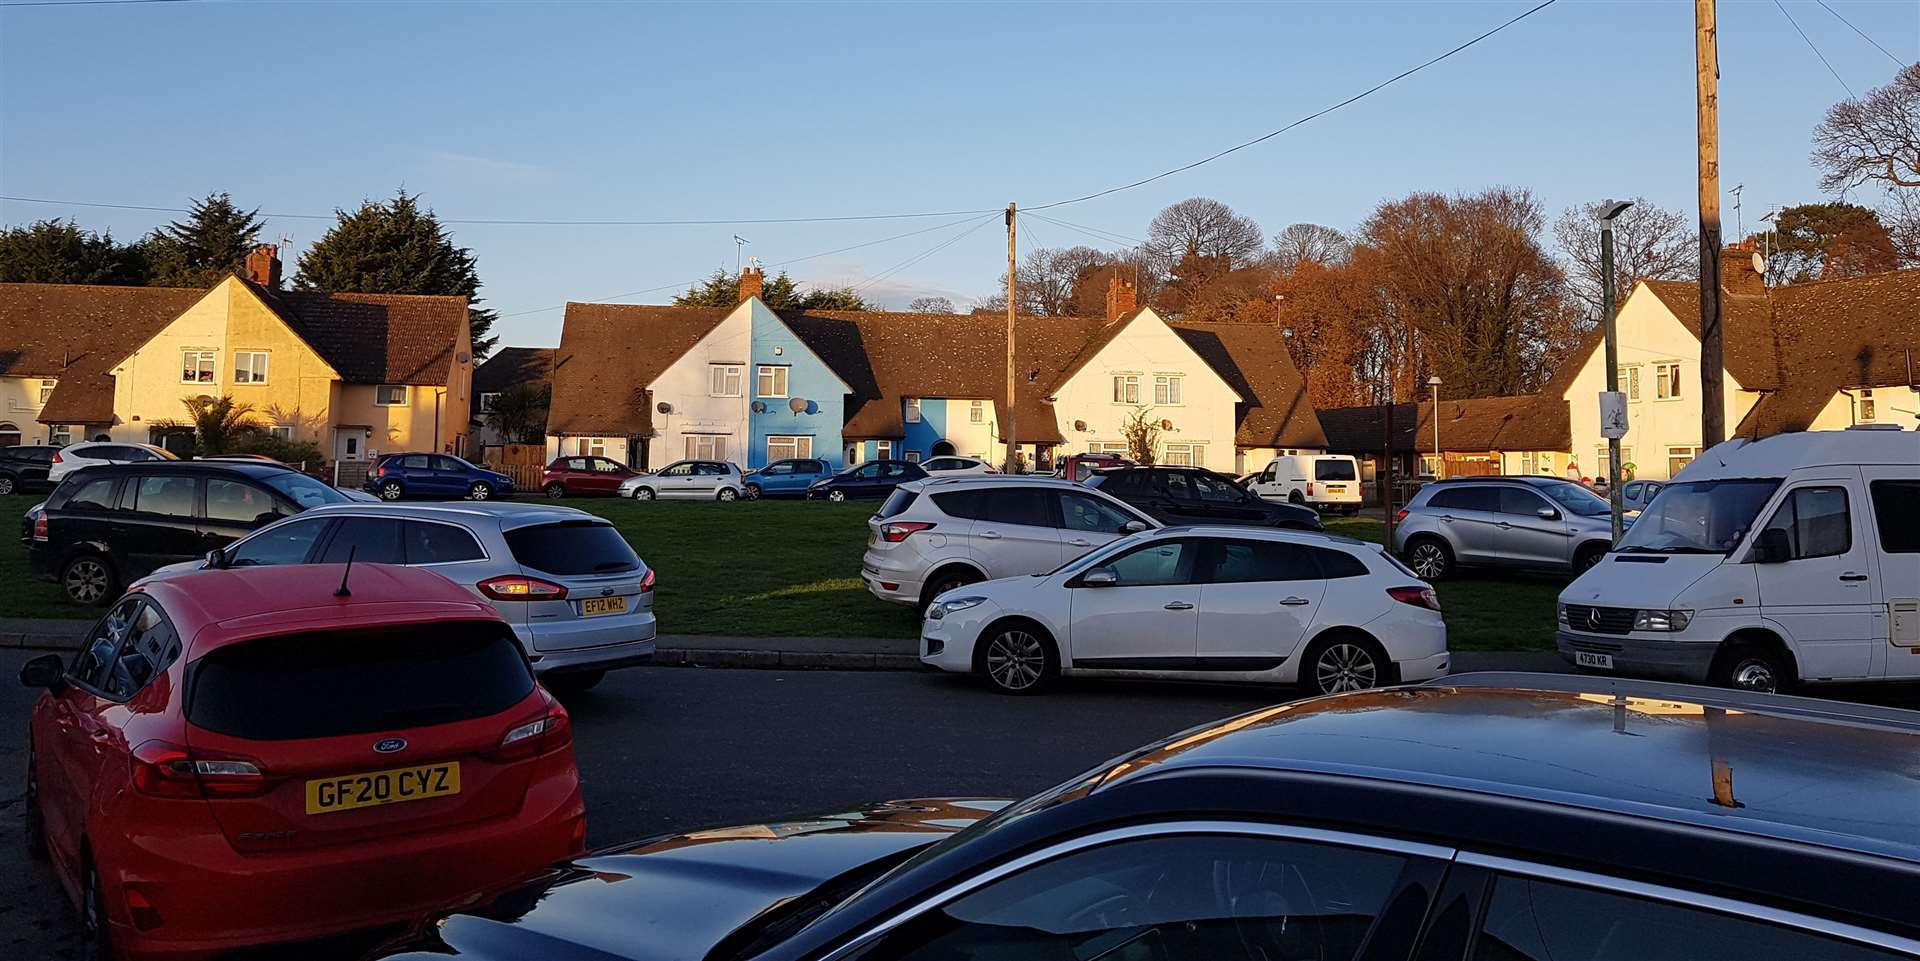 Residents in Greenway, Barming say they are fed up with inconsiderate parking